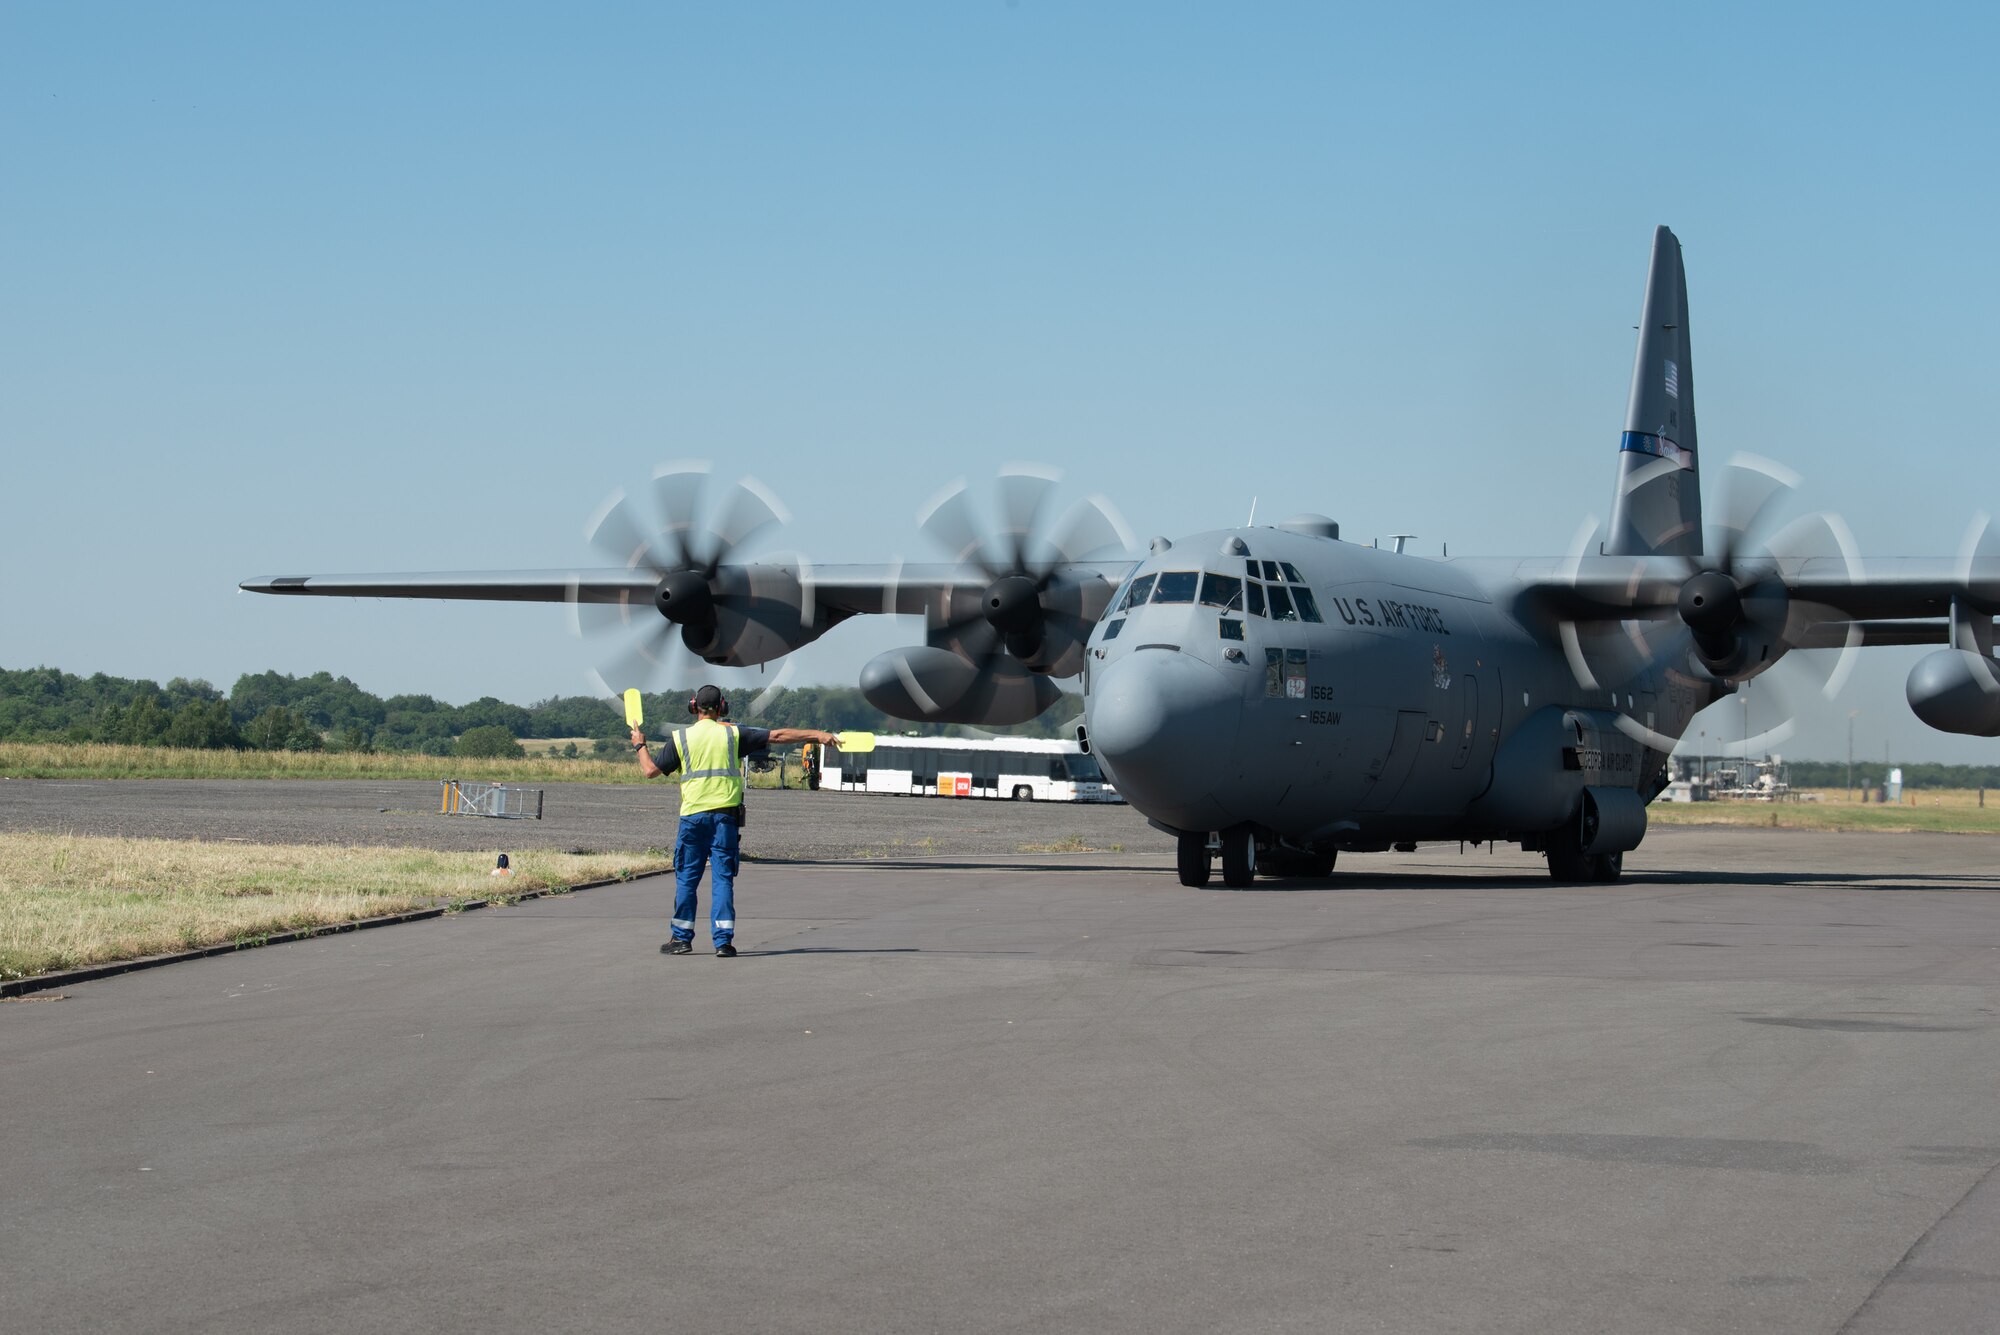 A C-130 Hercules aircraft assigned to the 165th Airlift Wing, Georgia National Guard, is marshaled at Saarbrucken Airport during exercise Air Defender 2023 (AD23) in Saarbrucken, Germany, June 14, 2023. Exercise AD23 integrates both U.S. and allied air-power to defend shared values, while leveraging and strengthening vital partnerships to deter aggression around the world. (U.S. Air National Guard photo by Master Sgt. Phil Speck)